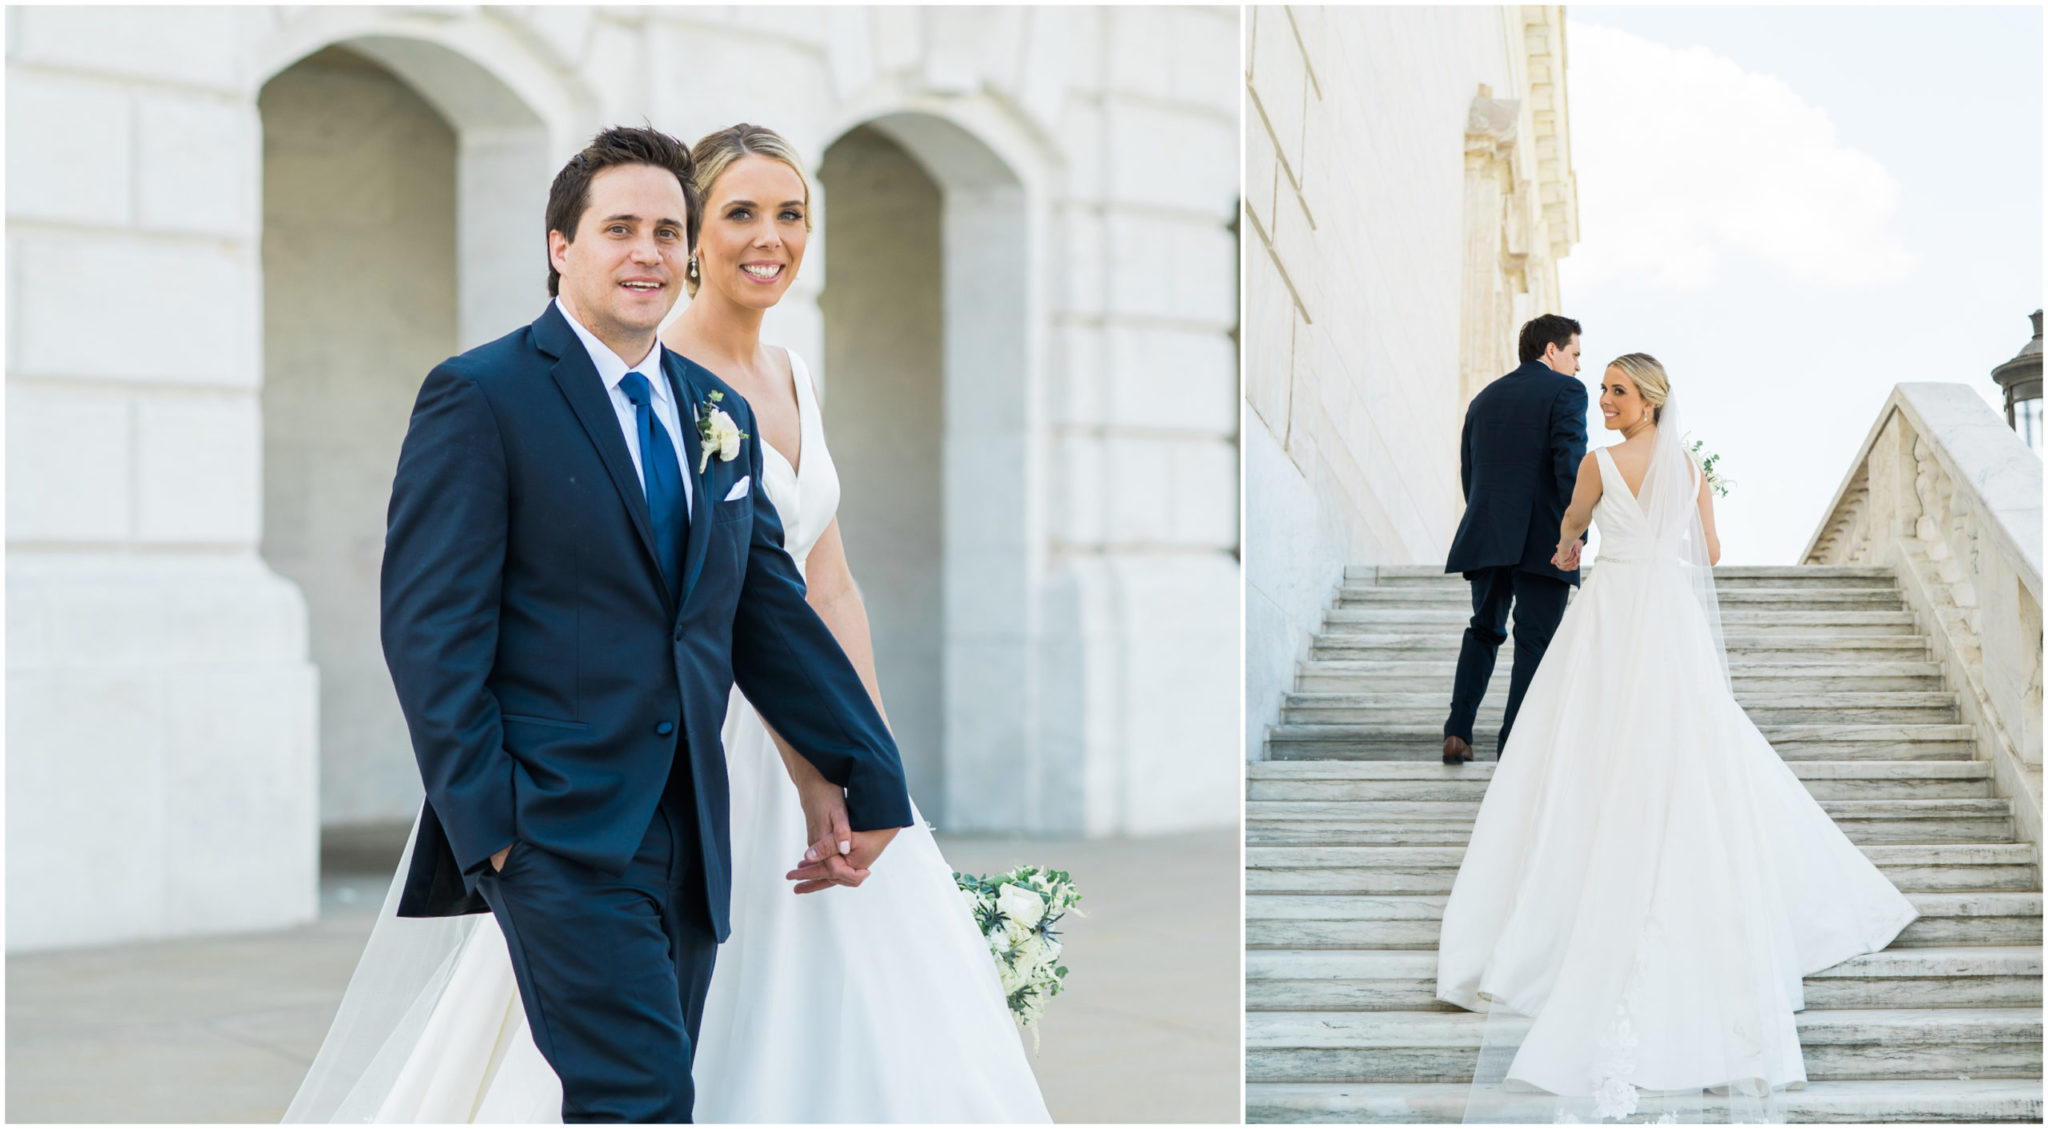 a couple looking at one another and walking during their wedding day portraits at the detroit institute of arts,downtown detroit wedding day